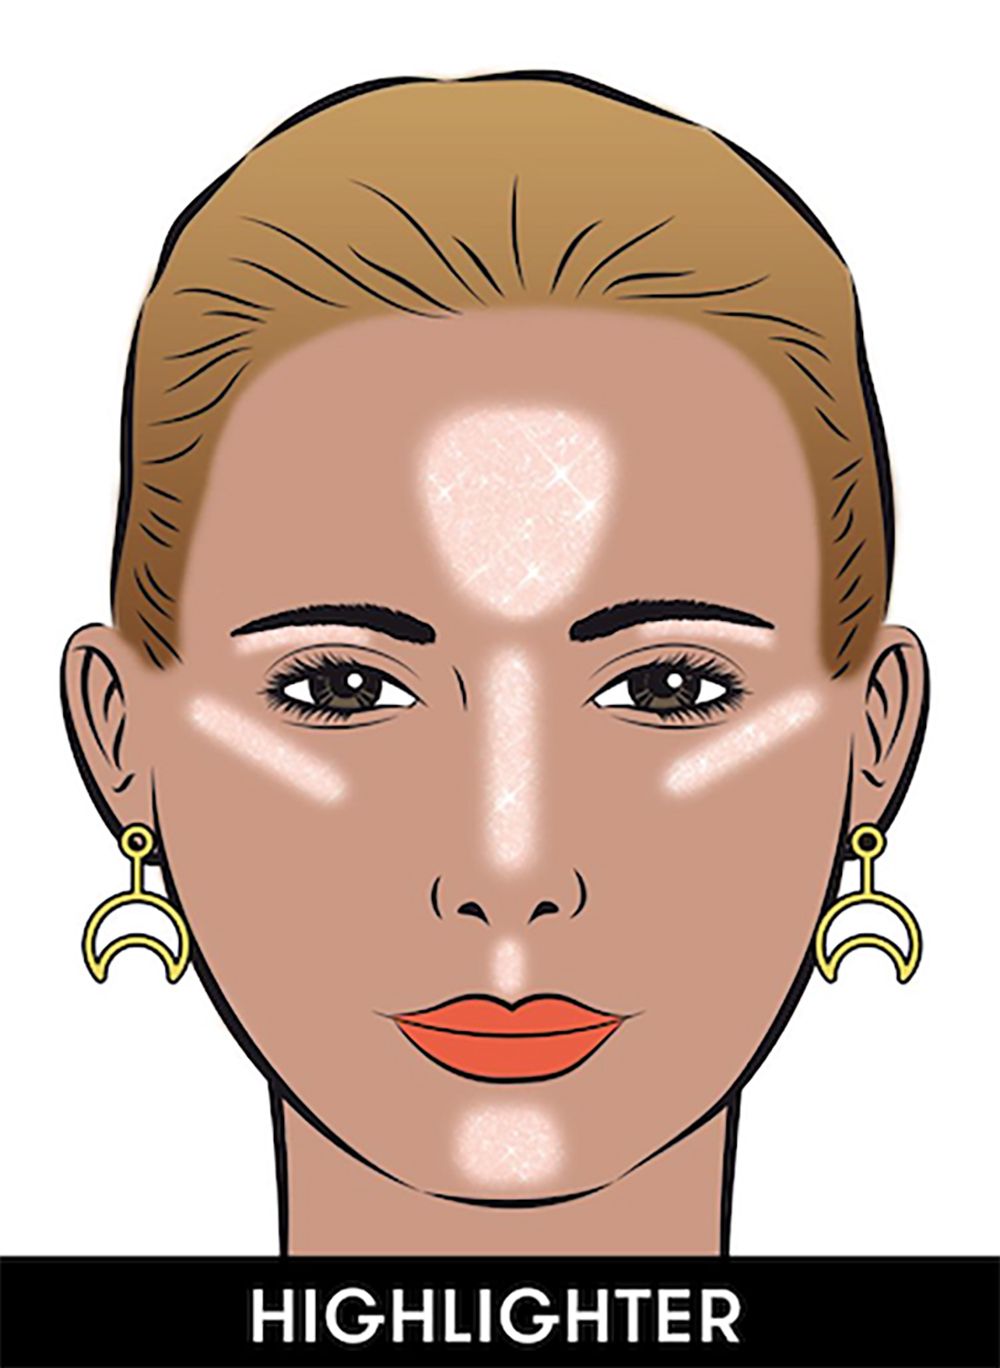 How Contour Your Face in 4 Steps - Contour Makeup & Highlight Tips